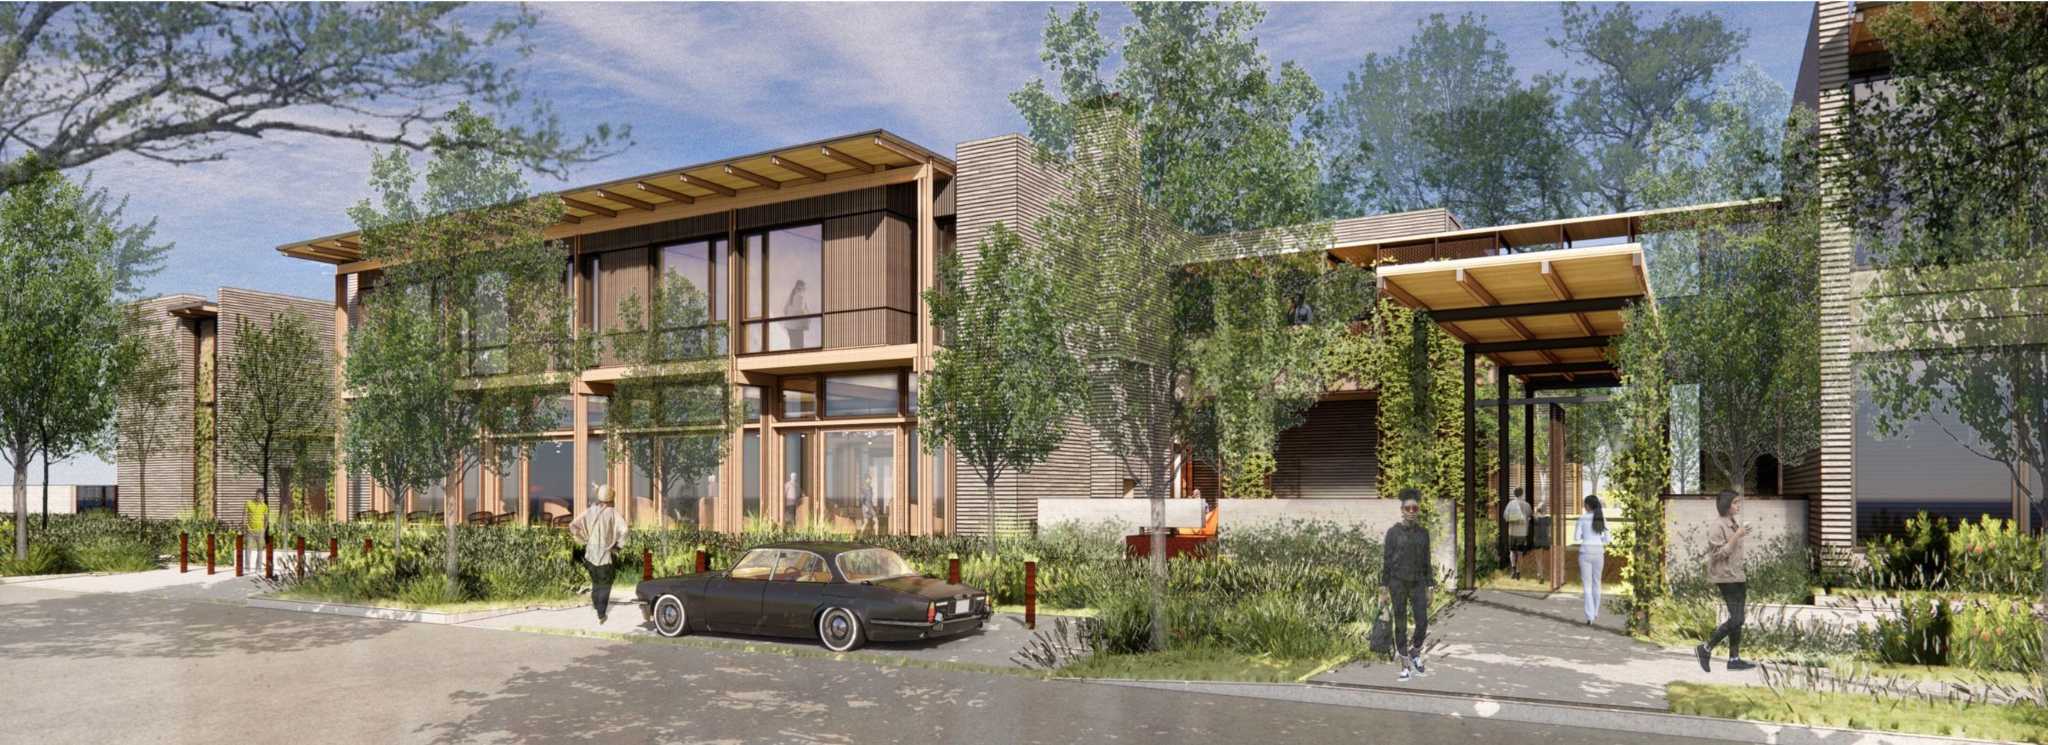 71 room boutique hotel breaks ground in Montrose